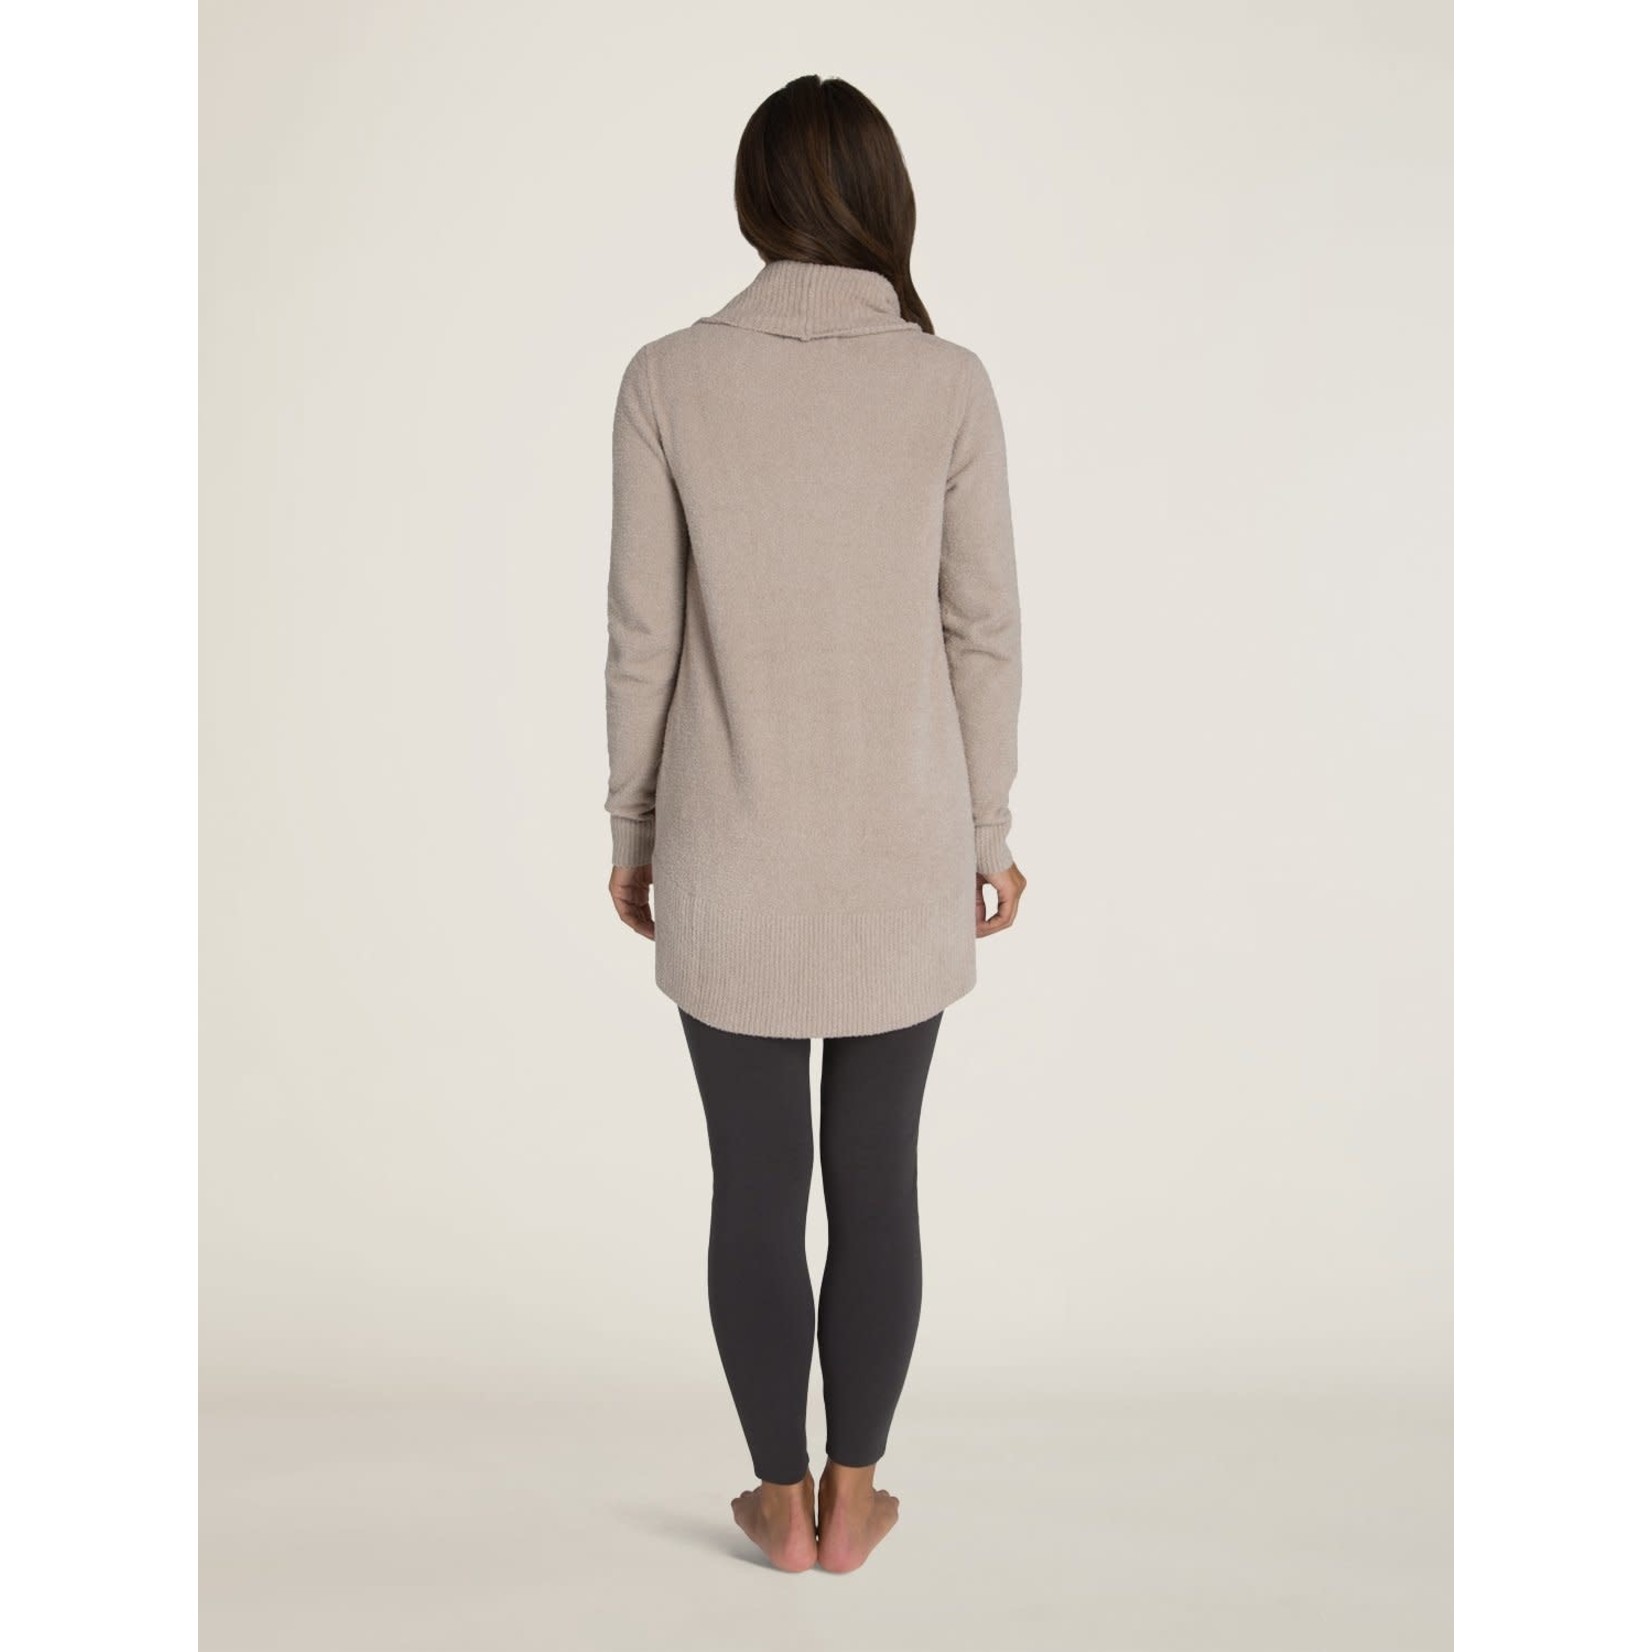 Barefoot Dreams CozyChic Lite Circle Cardi in Taupe